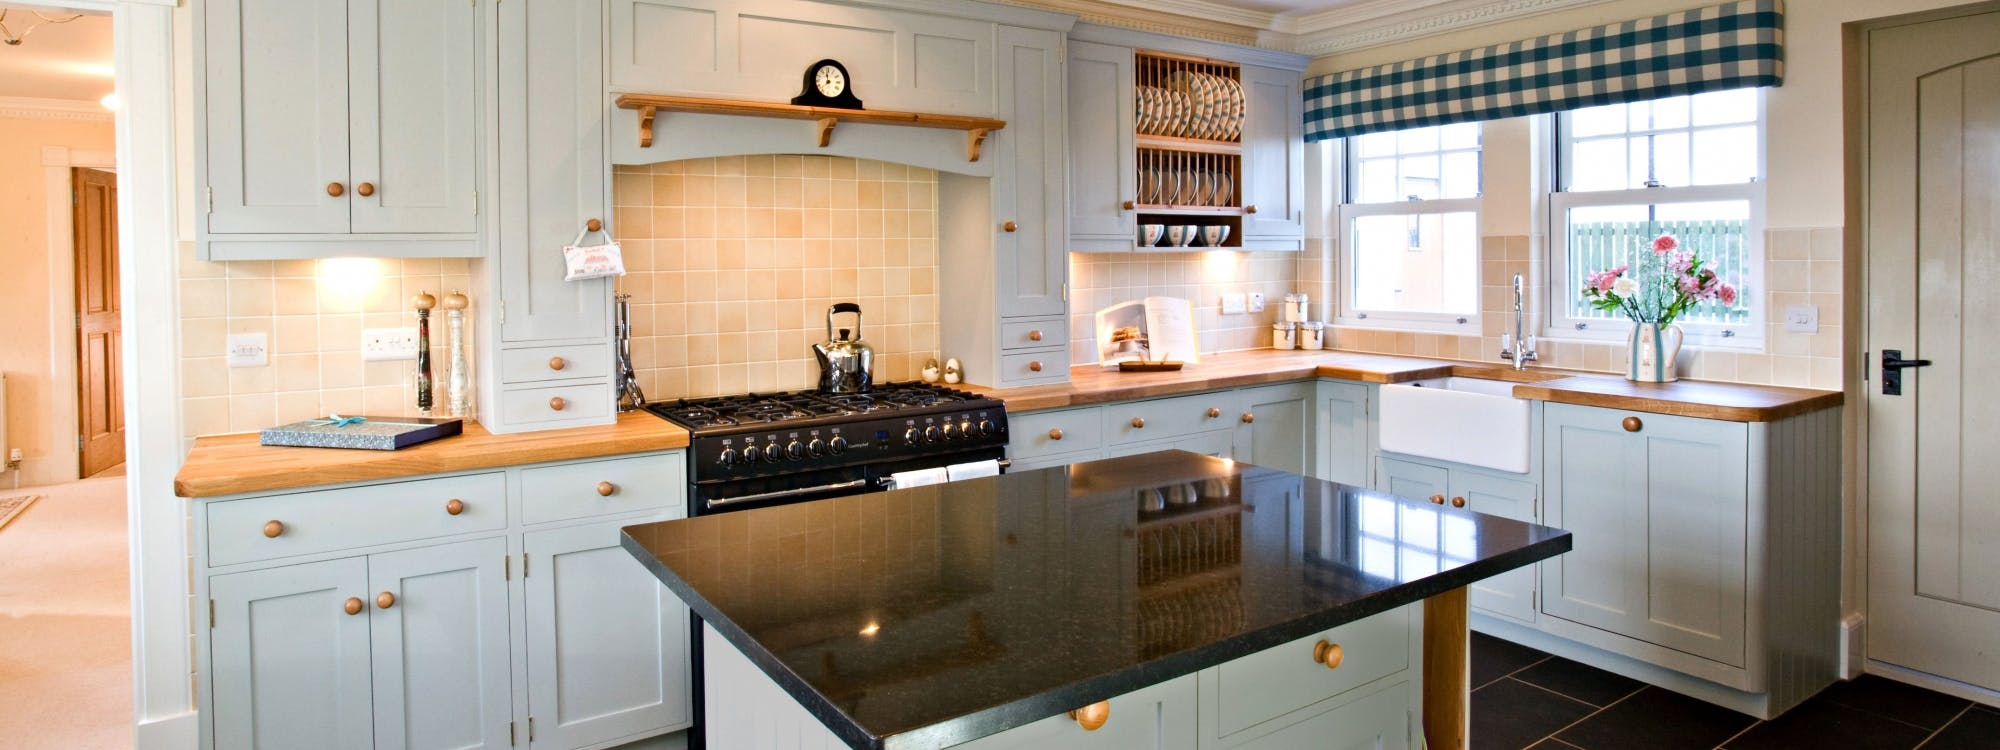 internal improvements - fitted kitchens designed, supplied, project managed & installed